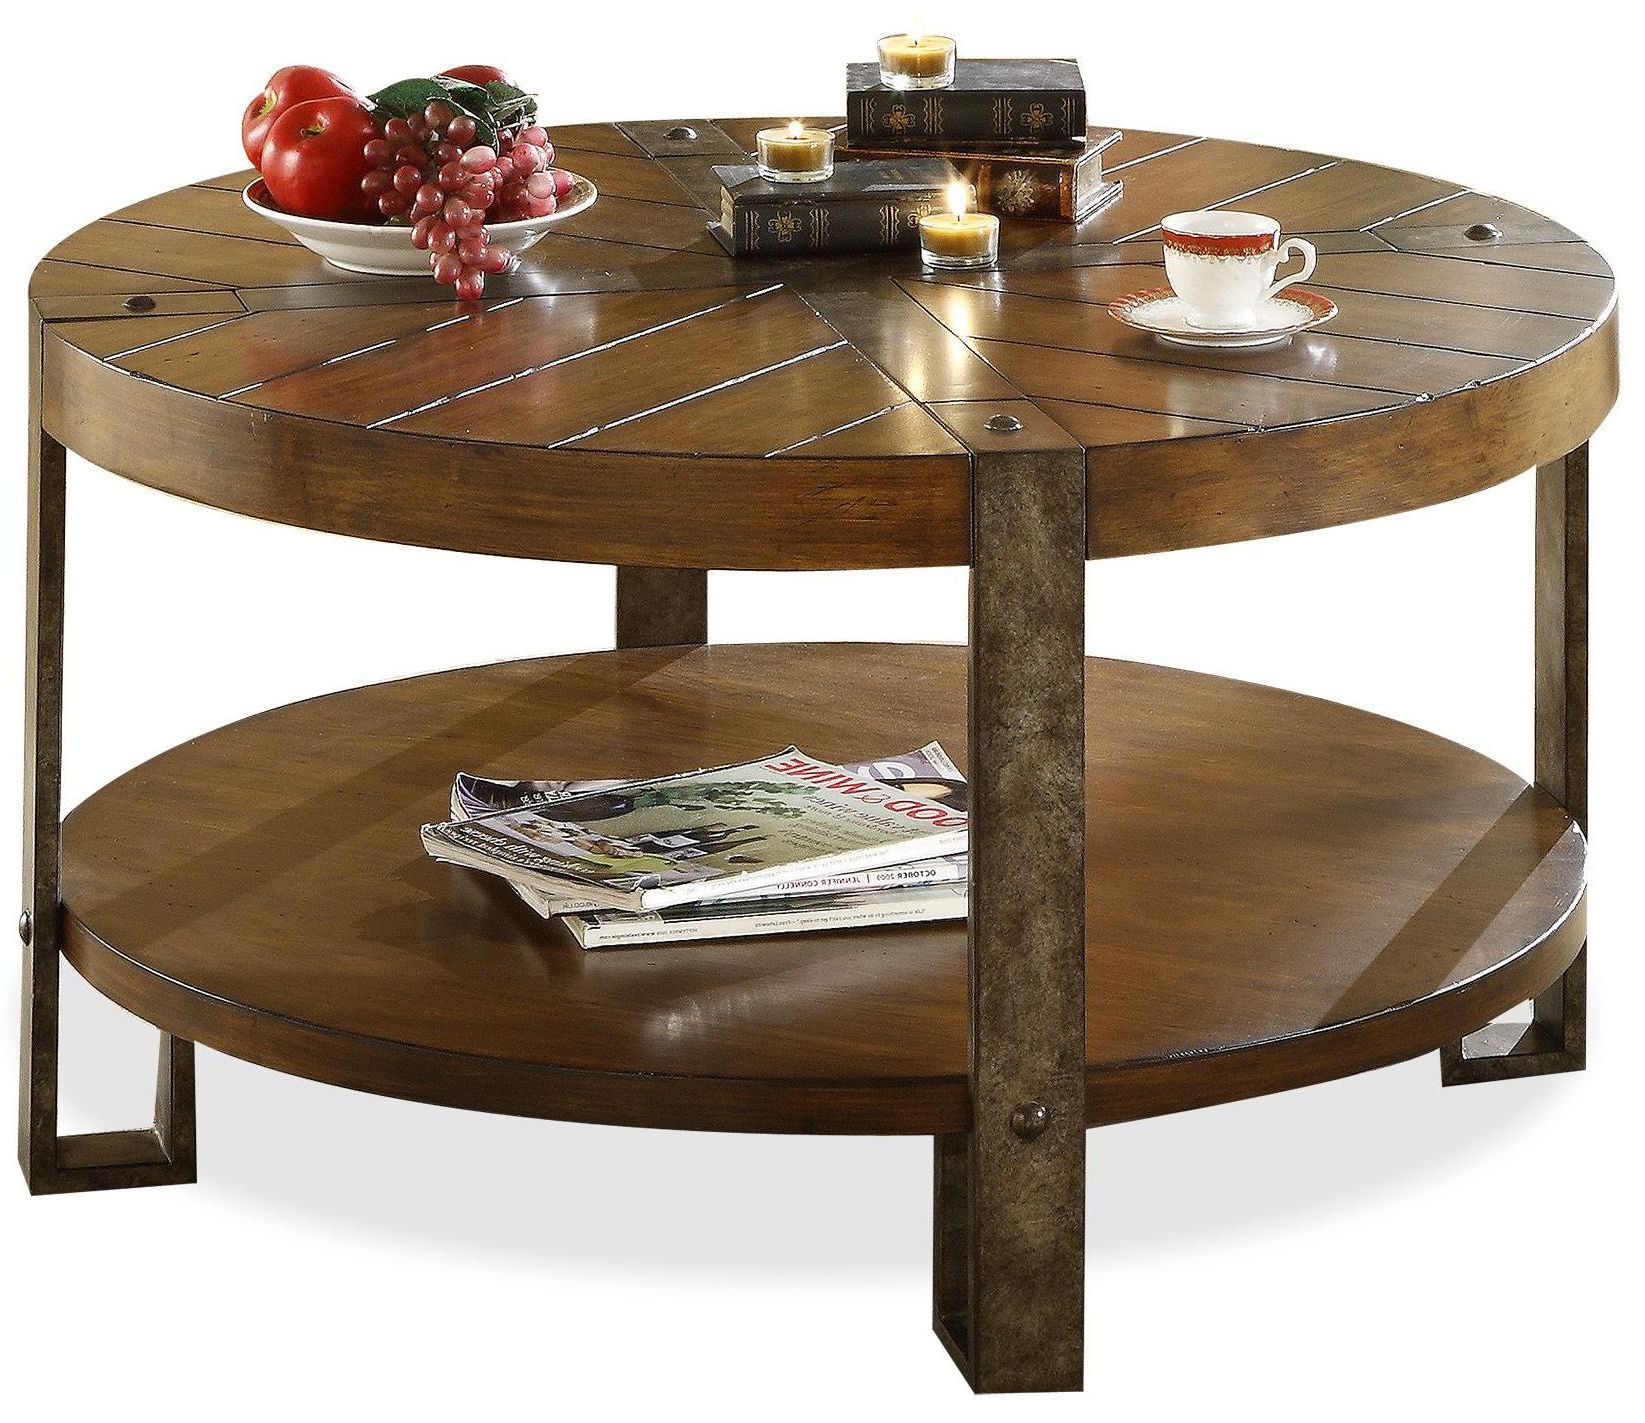 Awesome Round Coffee Tables With Storage – Homesfeed With Famous Espresso Wood Storage Coffee Tables (View 15 of 20)